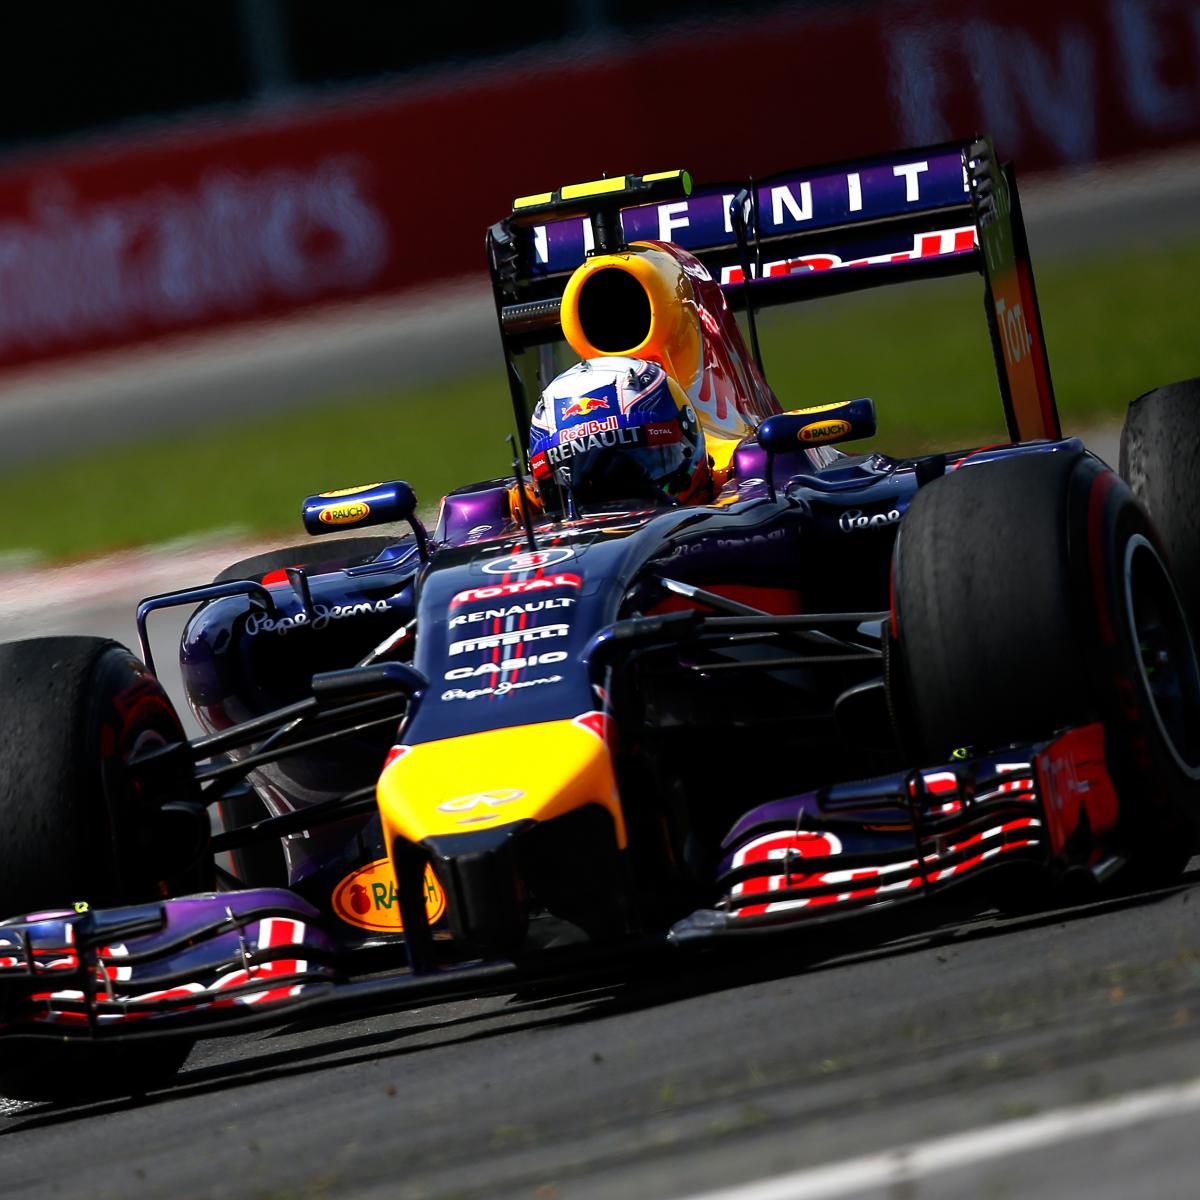 Canadian F1 Grand Prix 2014 Results: Winner, Standings, Highlights and